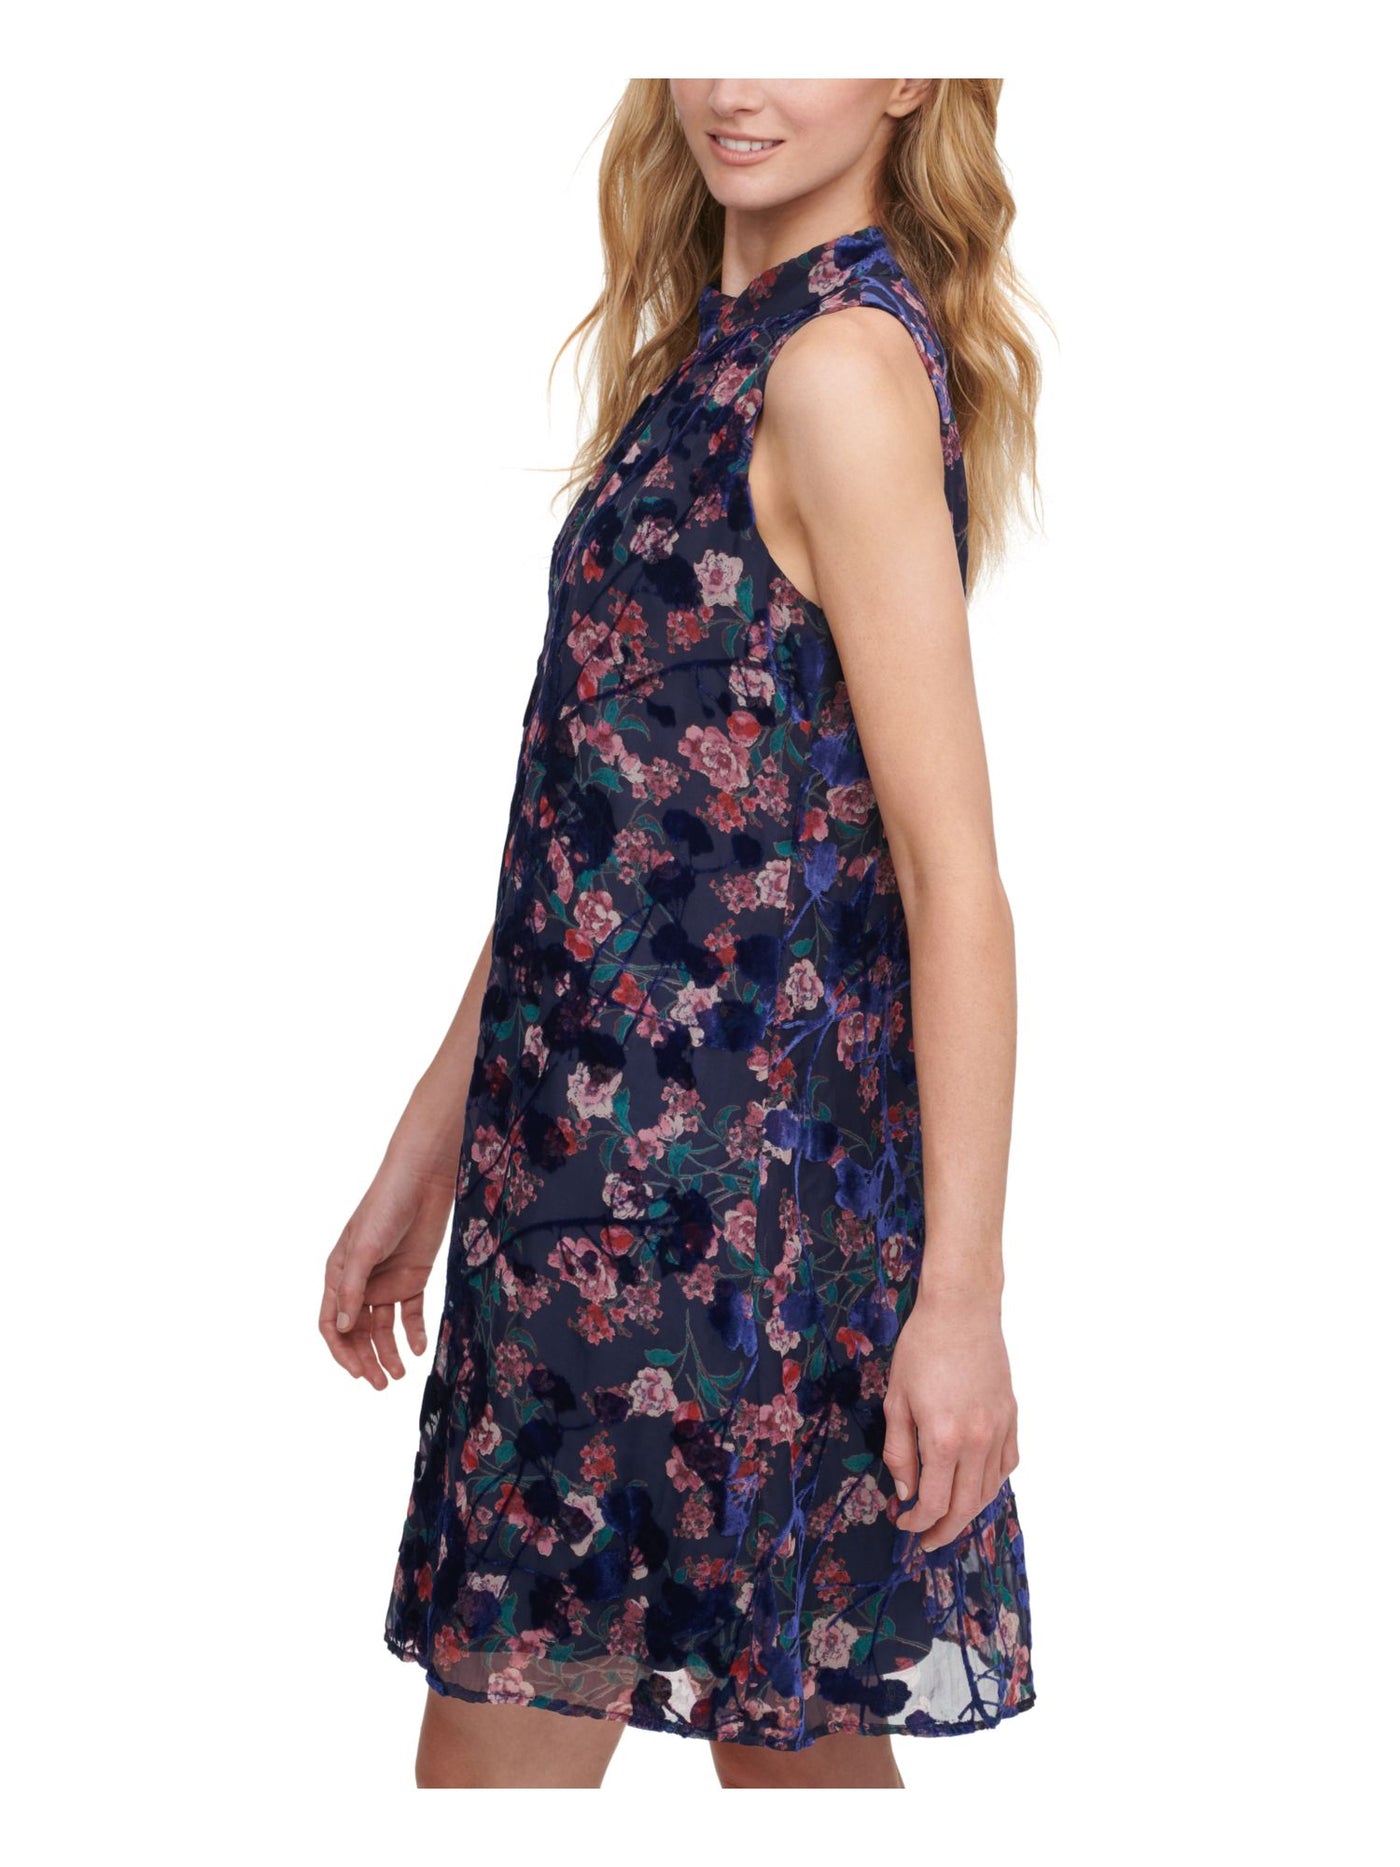 TOMMY HILFIGER Womens Navy Textured Mock-neck Burnout Floral Sleeveless Above The Knee A-Line Dress 2